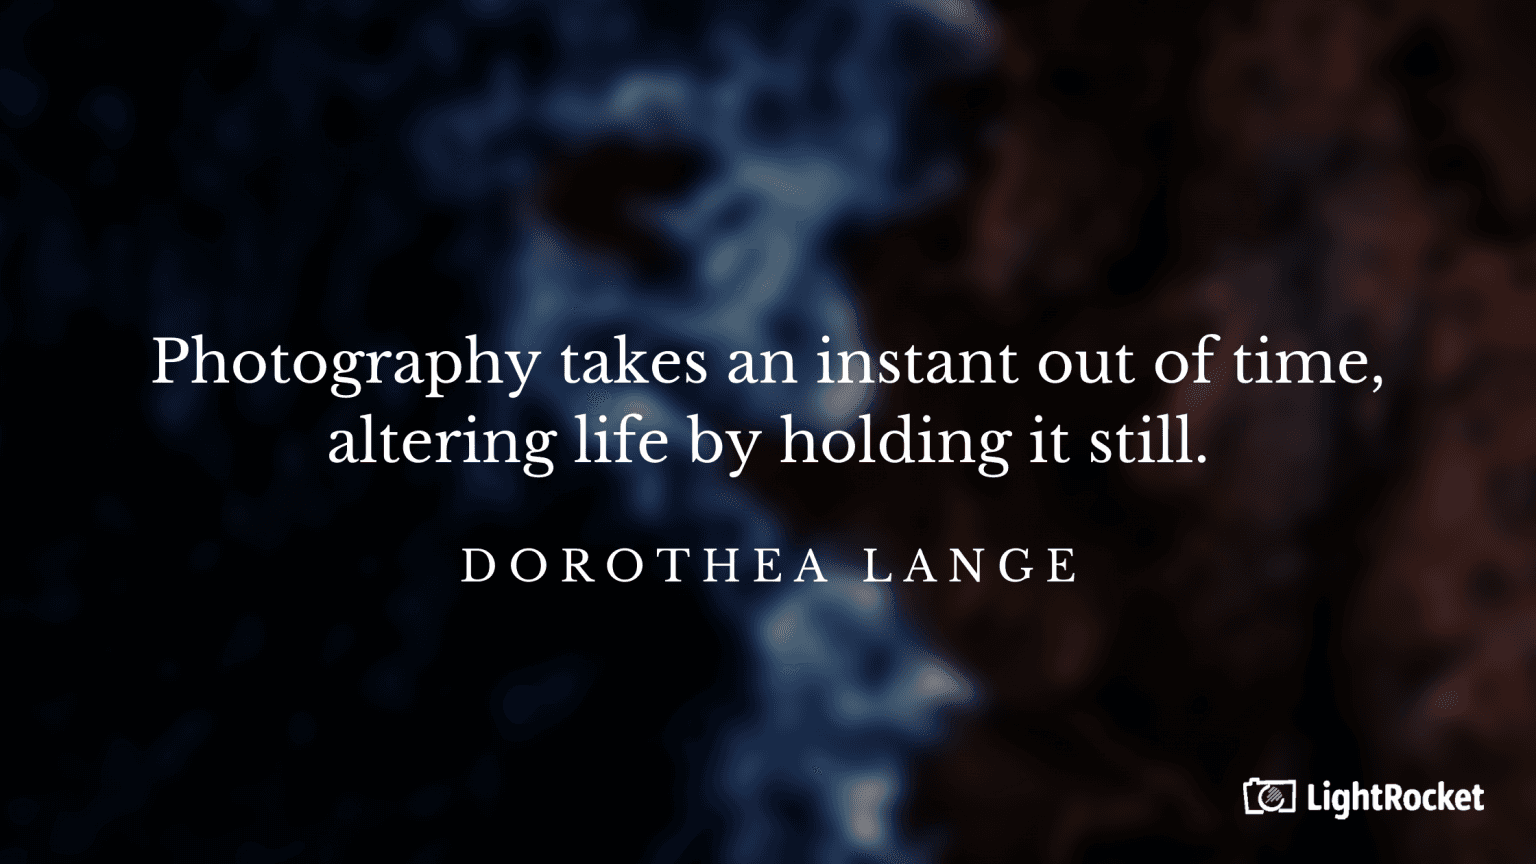 “Photography takes an instant out of time, altering life by holding it still.” – Dorothea Lange